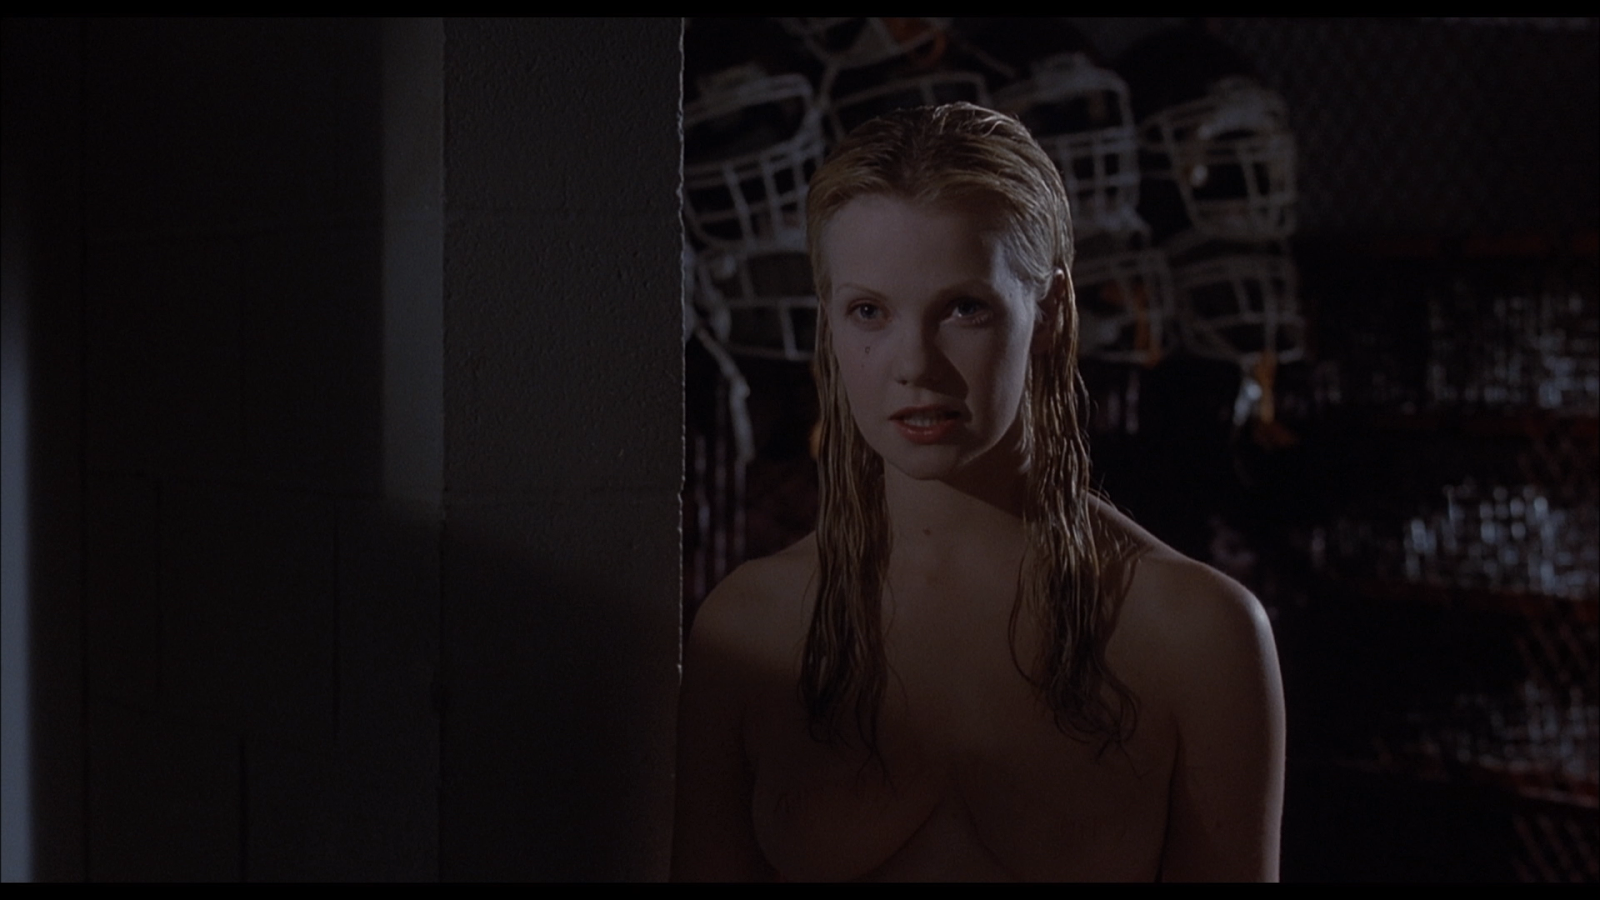 Happyotter666 NSFW site: THE FACULTY (1998)